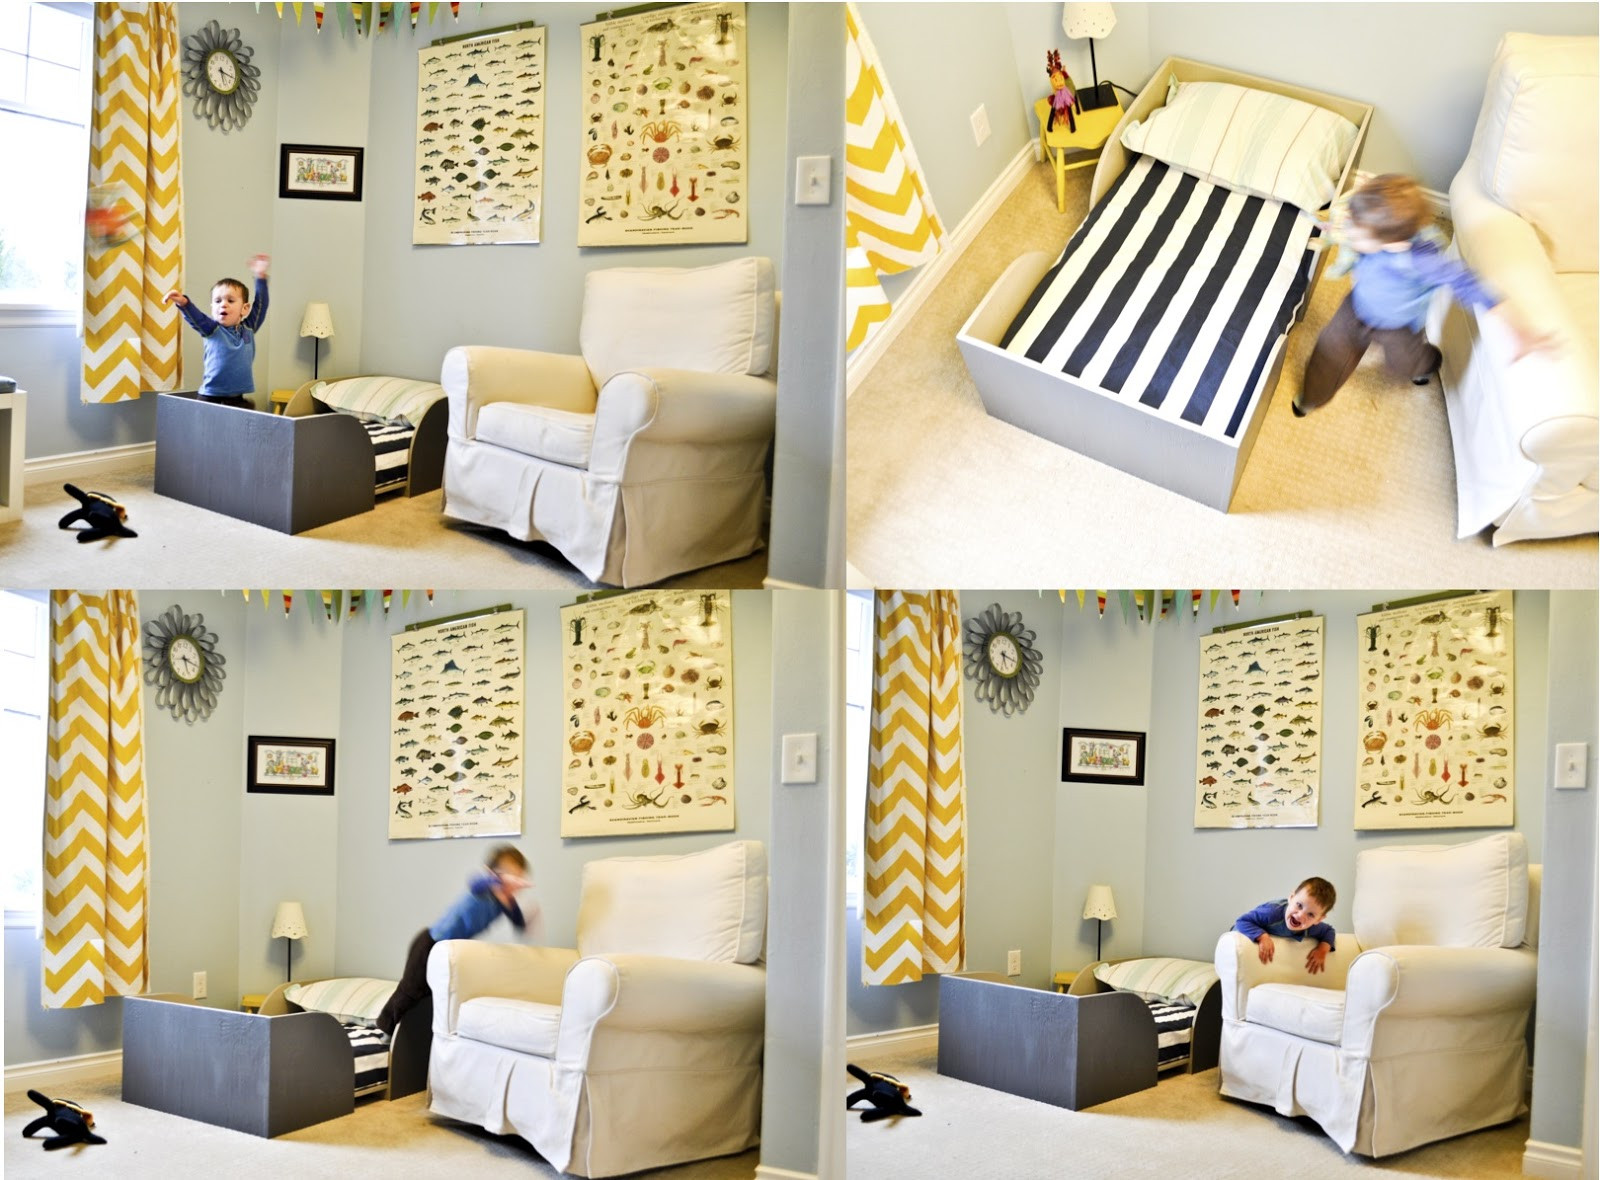 Best ideas about Toddler Bed DIY
. Save or Pin Chris and Sonja The Sweet Seattle Life DIY Toddler Bed Now.